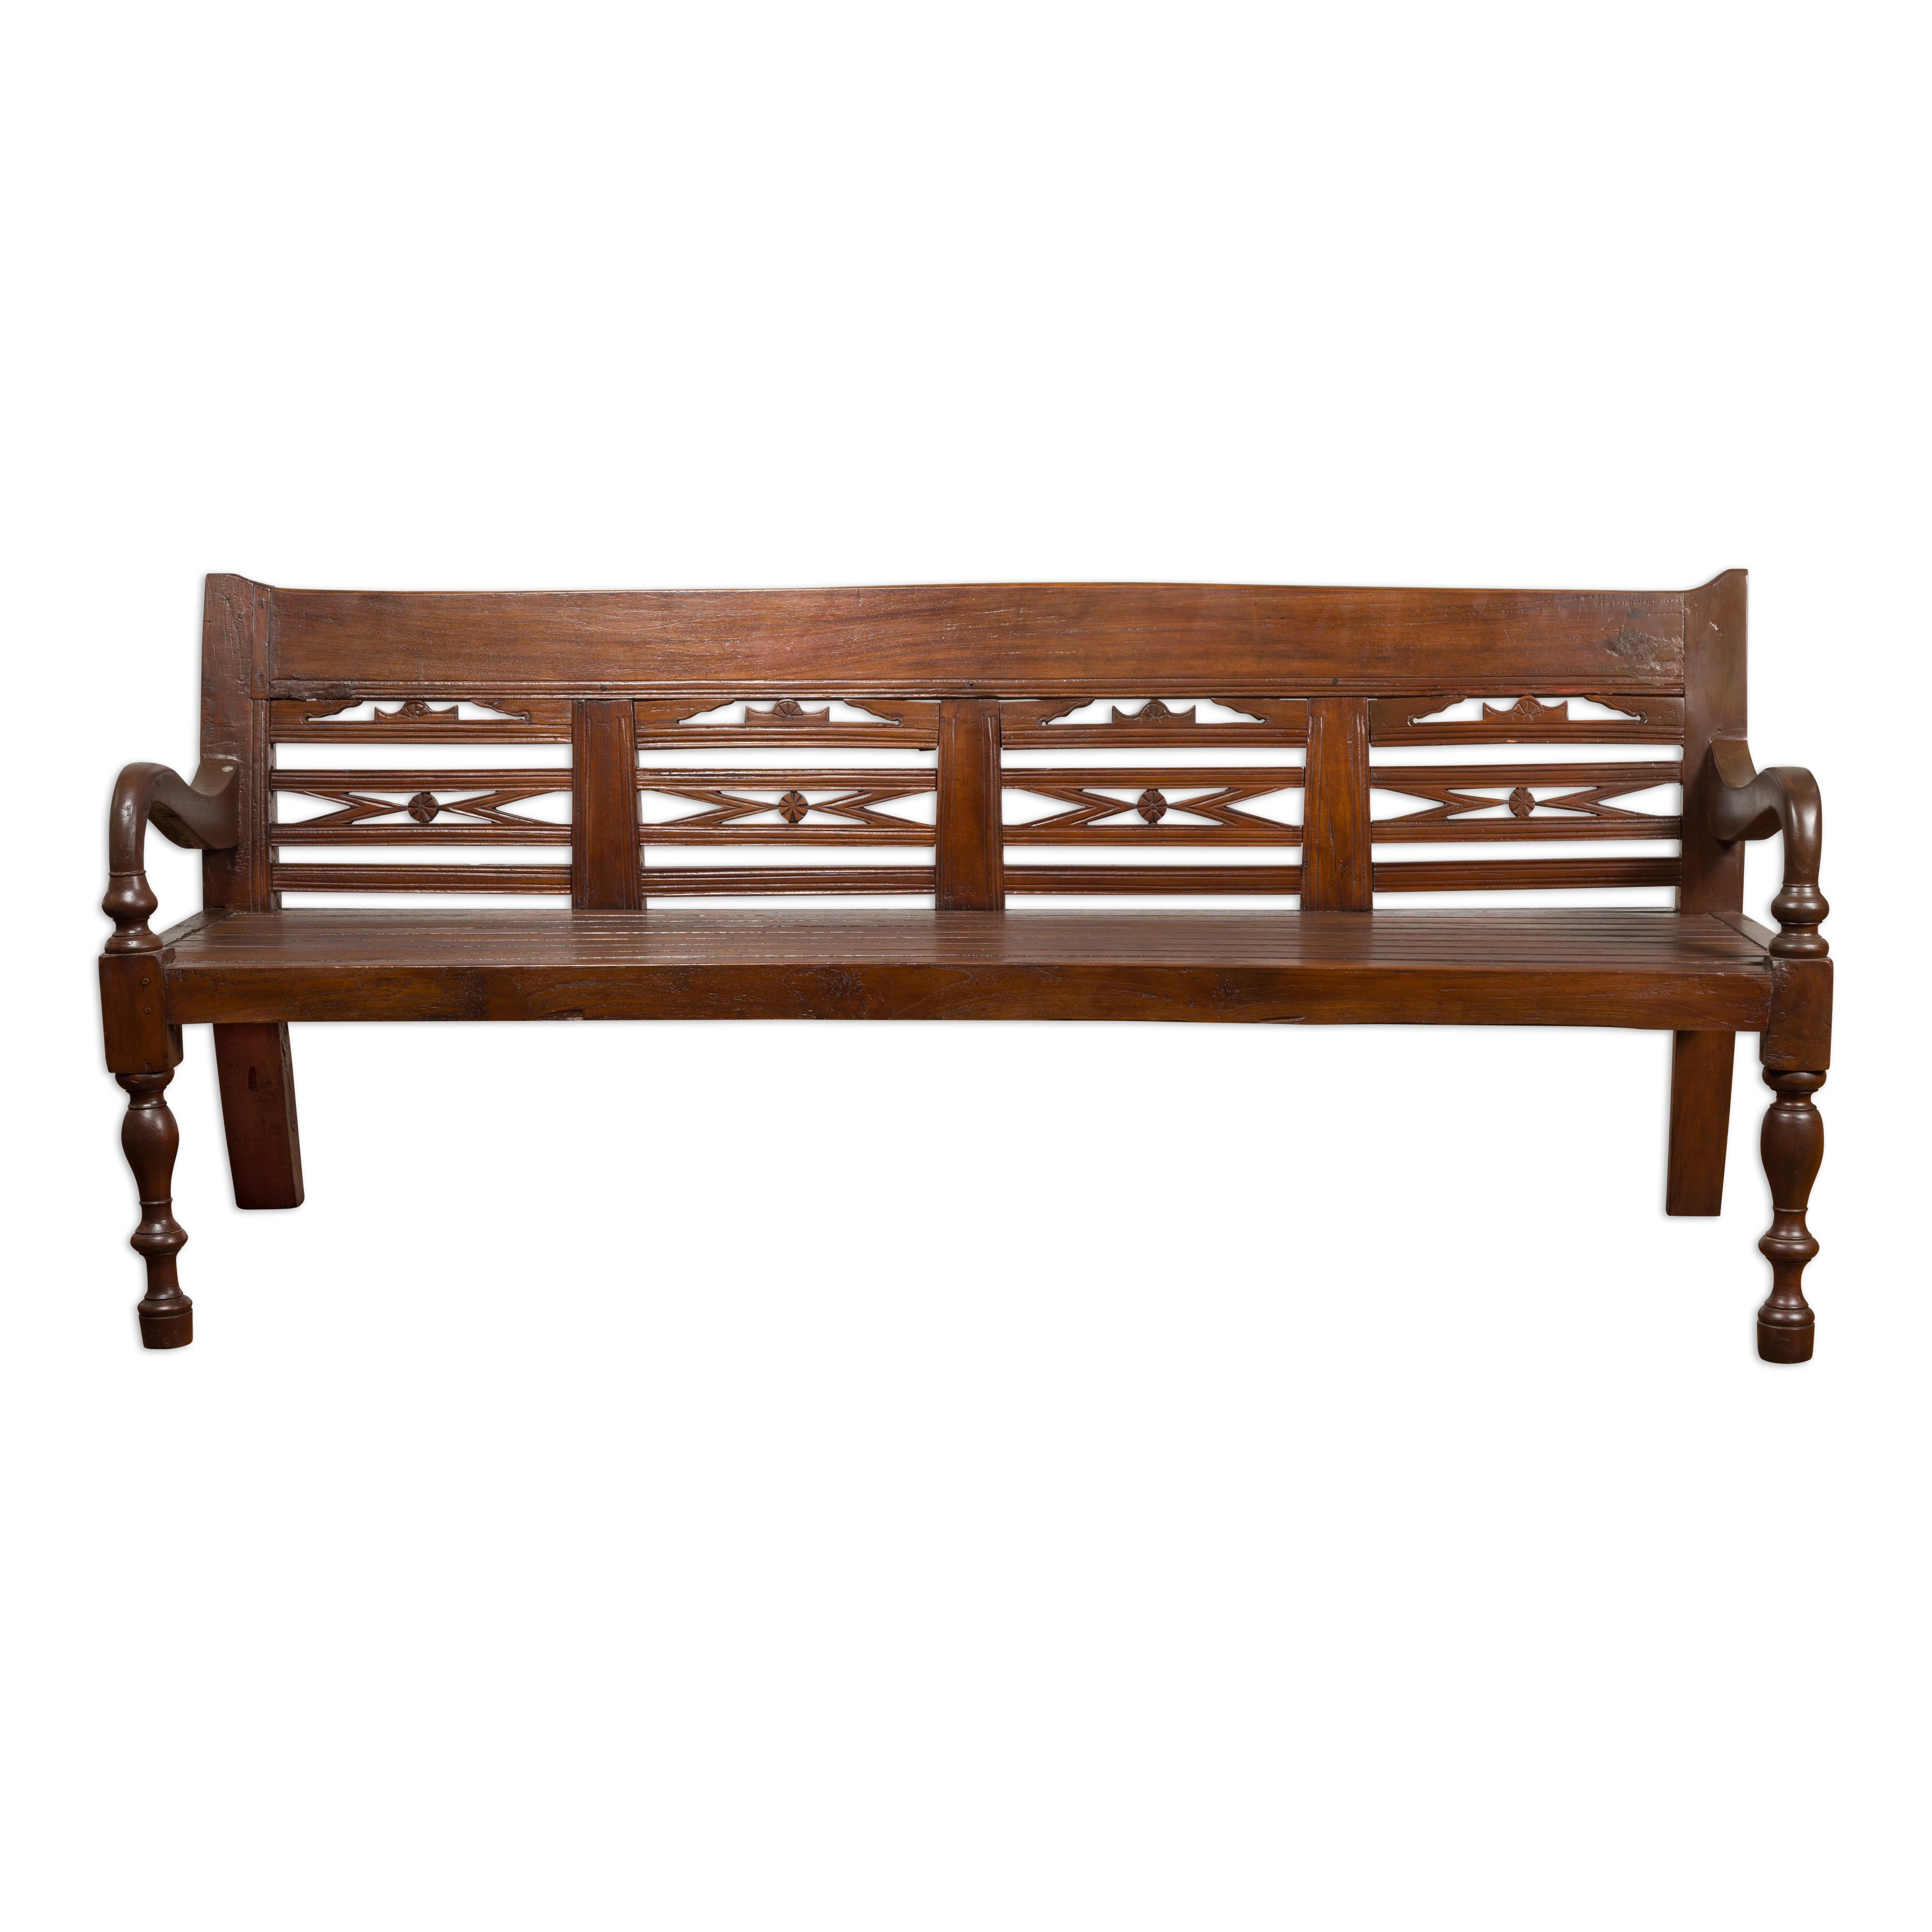 Antique Teak Wood Javanese Settee with Hand-Carved Back and Scrolling Arms For Sale 11